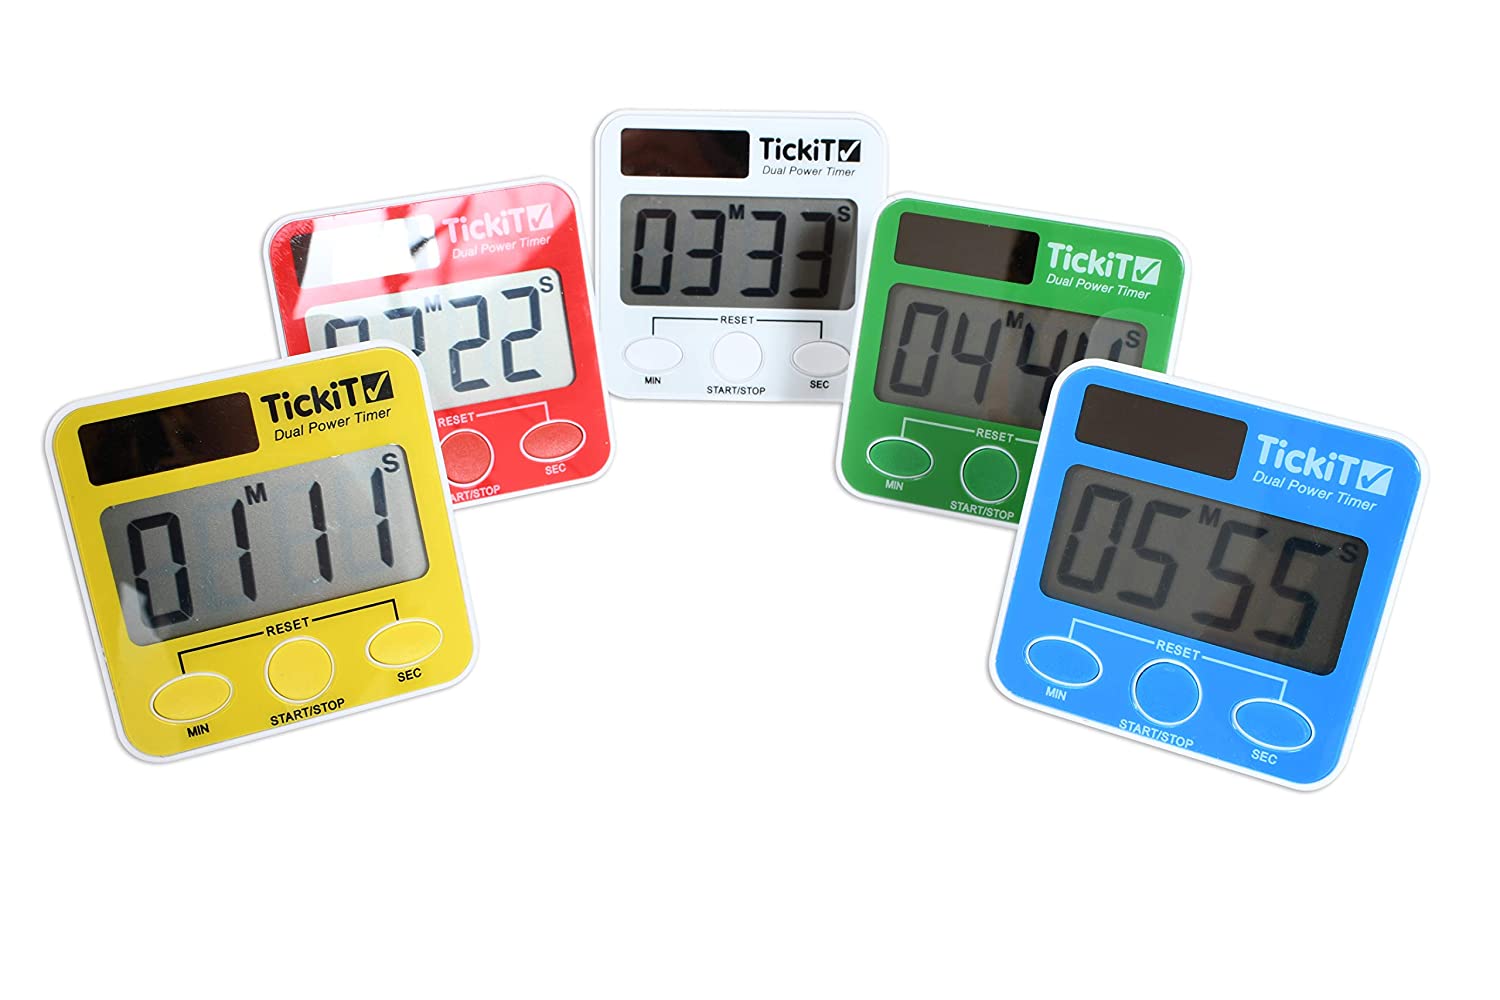 TickiT Dual Power Timers - Set of 5 - Red, Yellow, Green, Blue, White - Solar and Battery Powered Digital Timers - Includes Stand and Wall Mount Slot